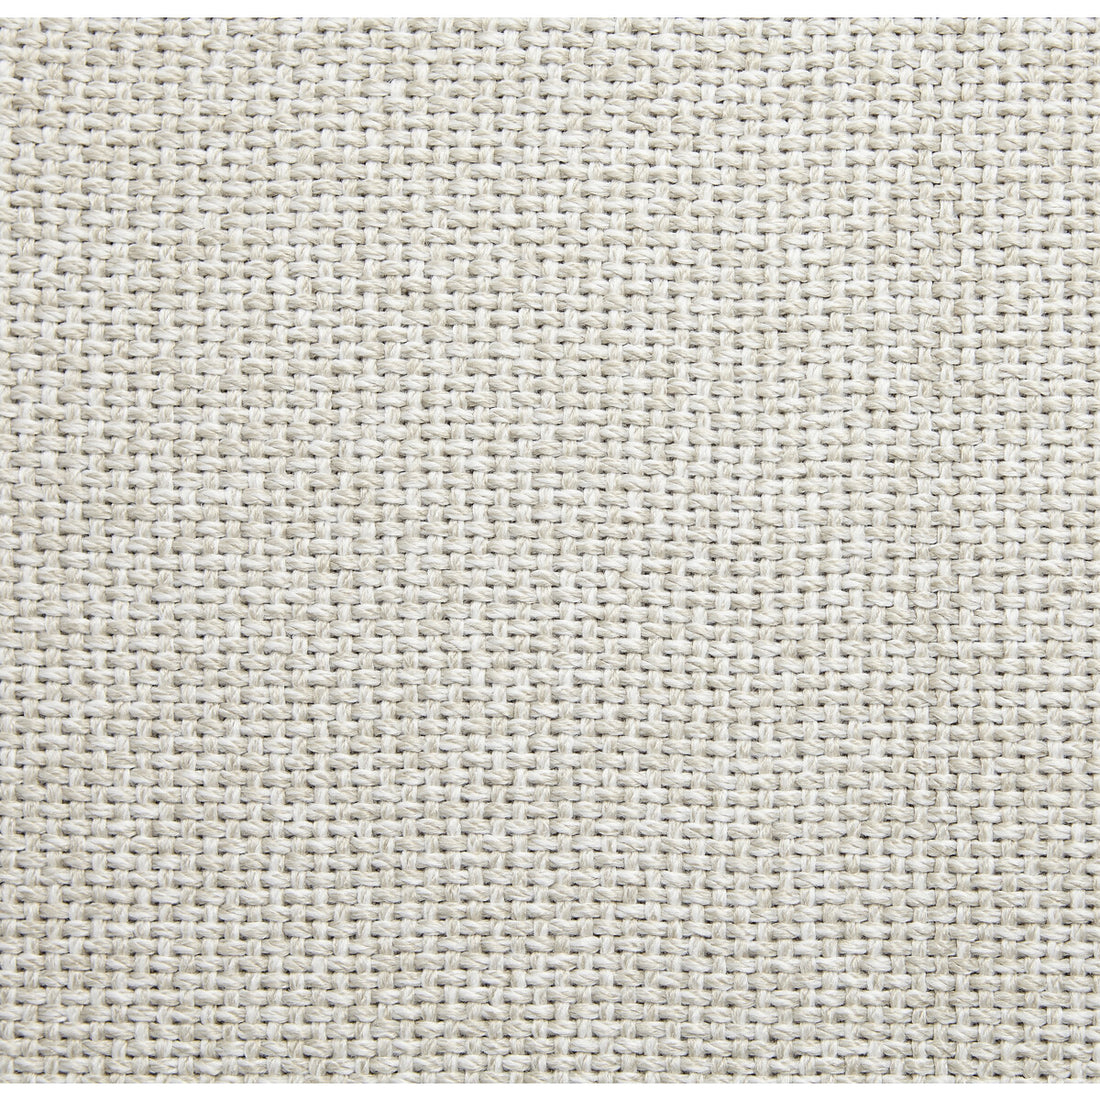 Begur fabric in 6 color - pattern LZ-30397.06.0 - by Kravet Design in the Lizzo Indoor/Outdoor collection